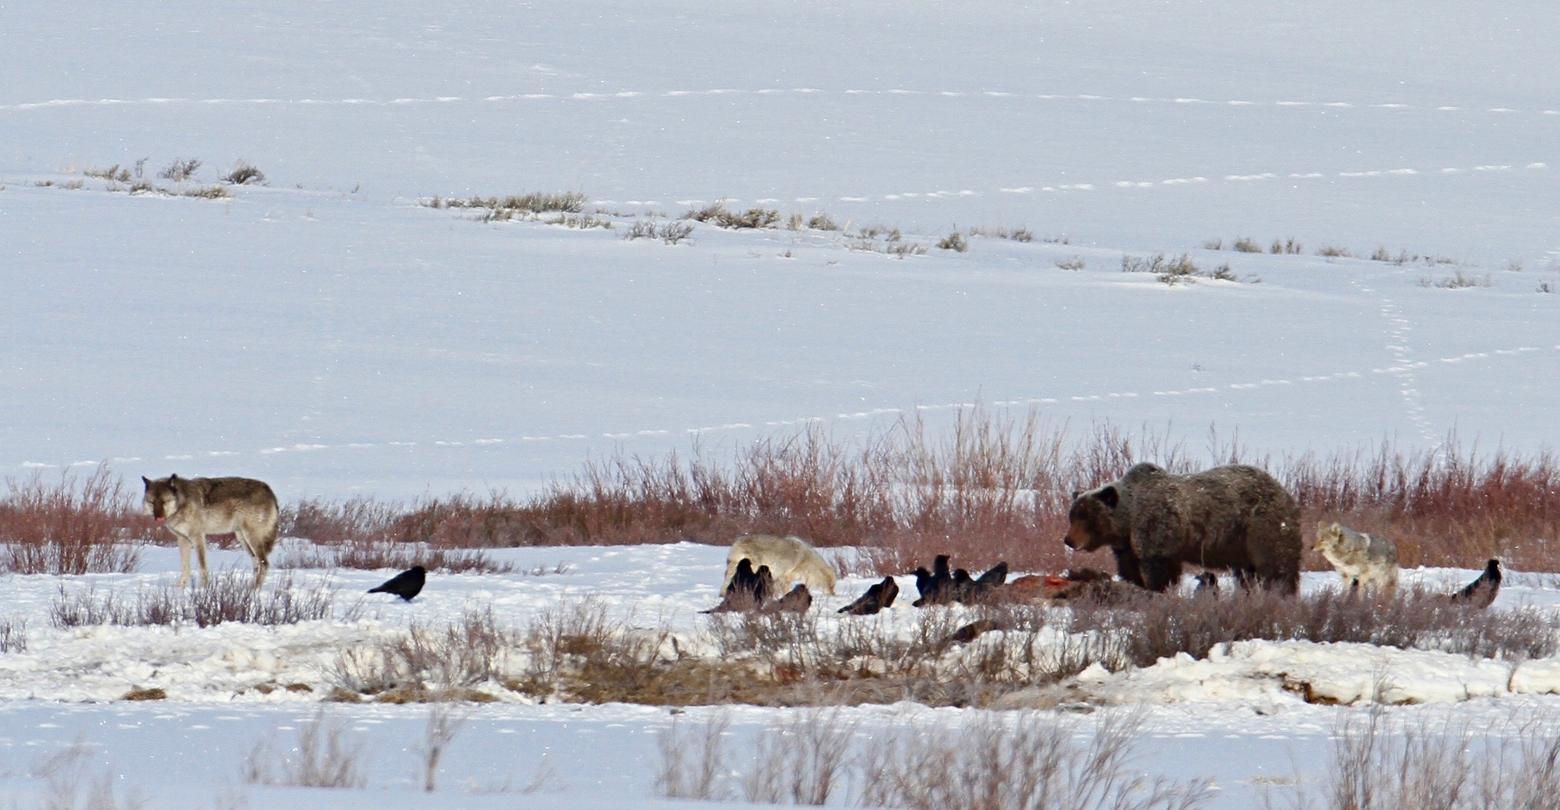 A grizzly is joined by a wolf (at left), coyotes (middle and at right) and ravens on a carcass in Yellowstone. While carcasses represent a smorgasbord for predators and scavengers, they are not always visible to people as they move through the landscape. It is important that people exercise caution because grizzlies might be on a carcass you don't readily see. Photo courtesy Jim Peco/NPS